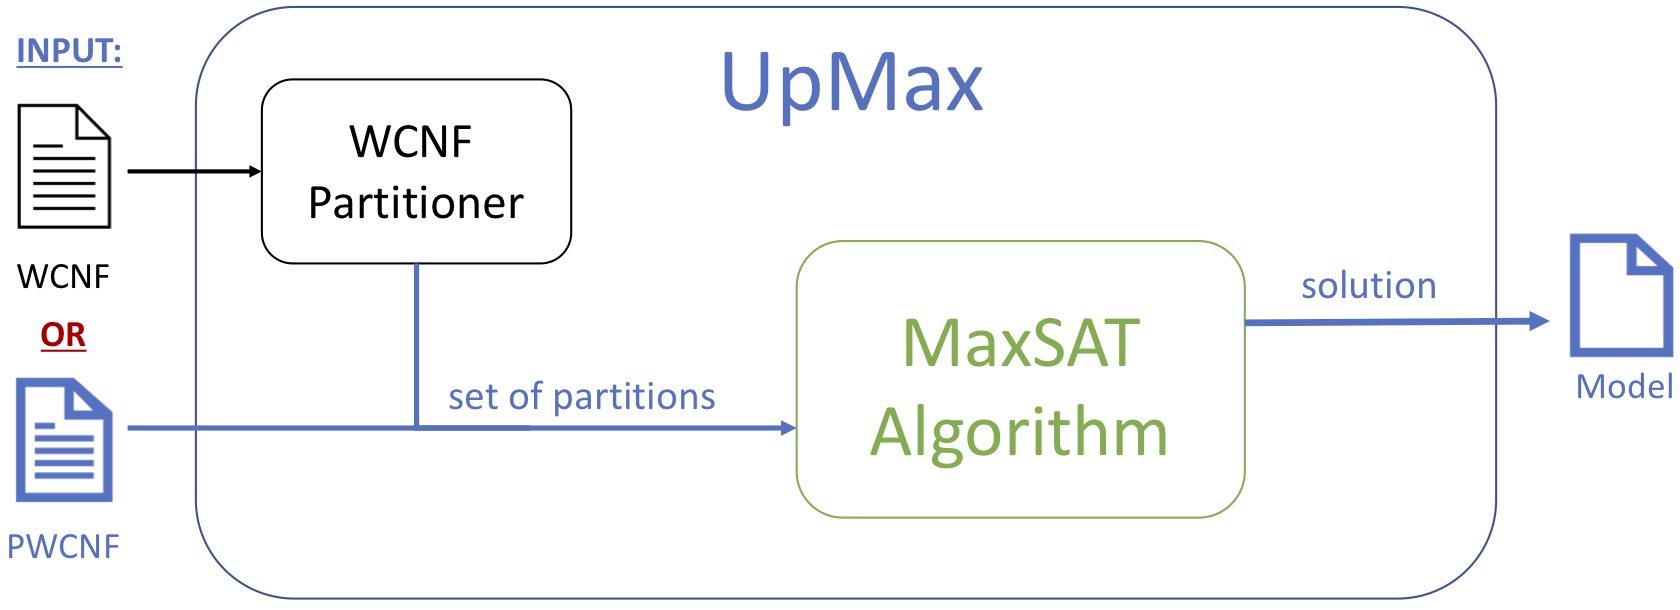 Overview of UpMax